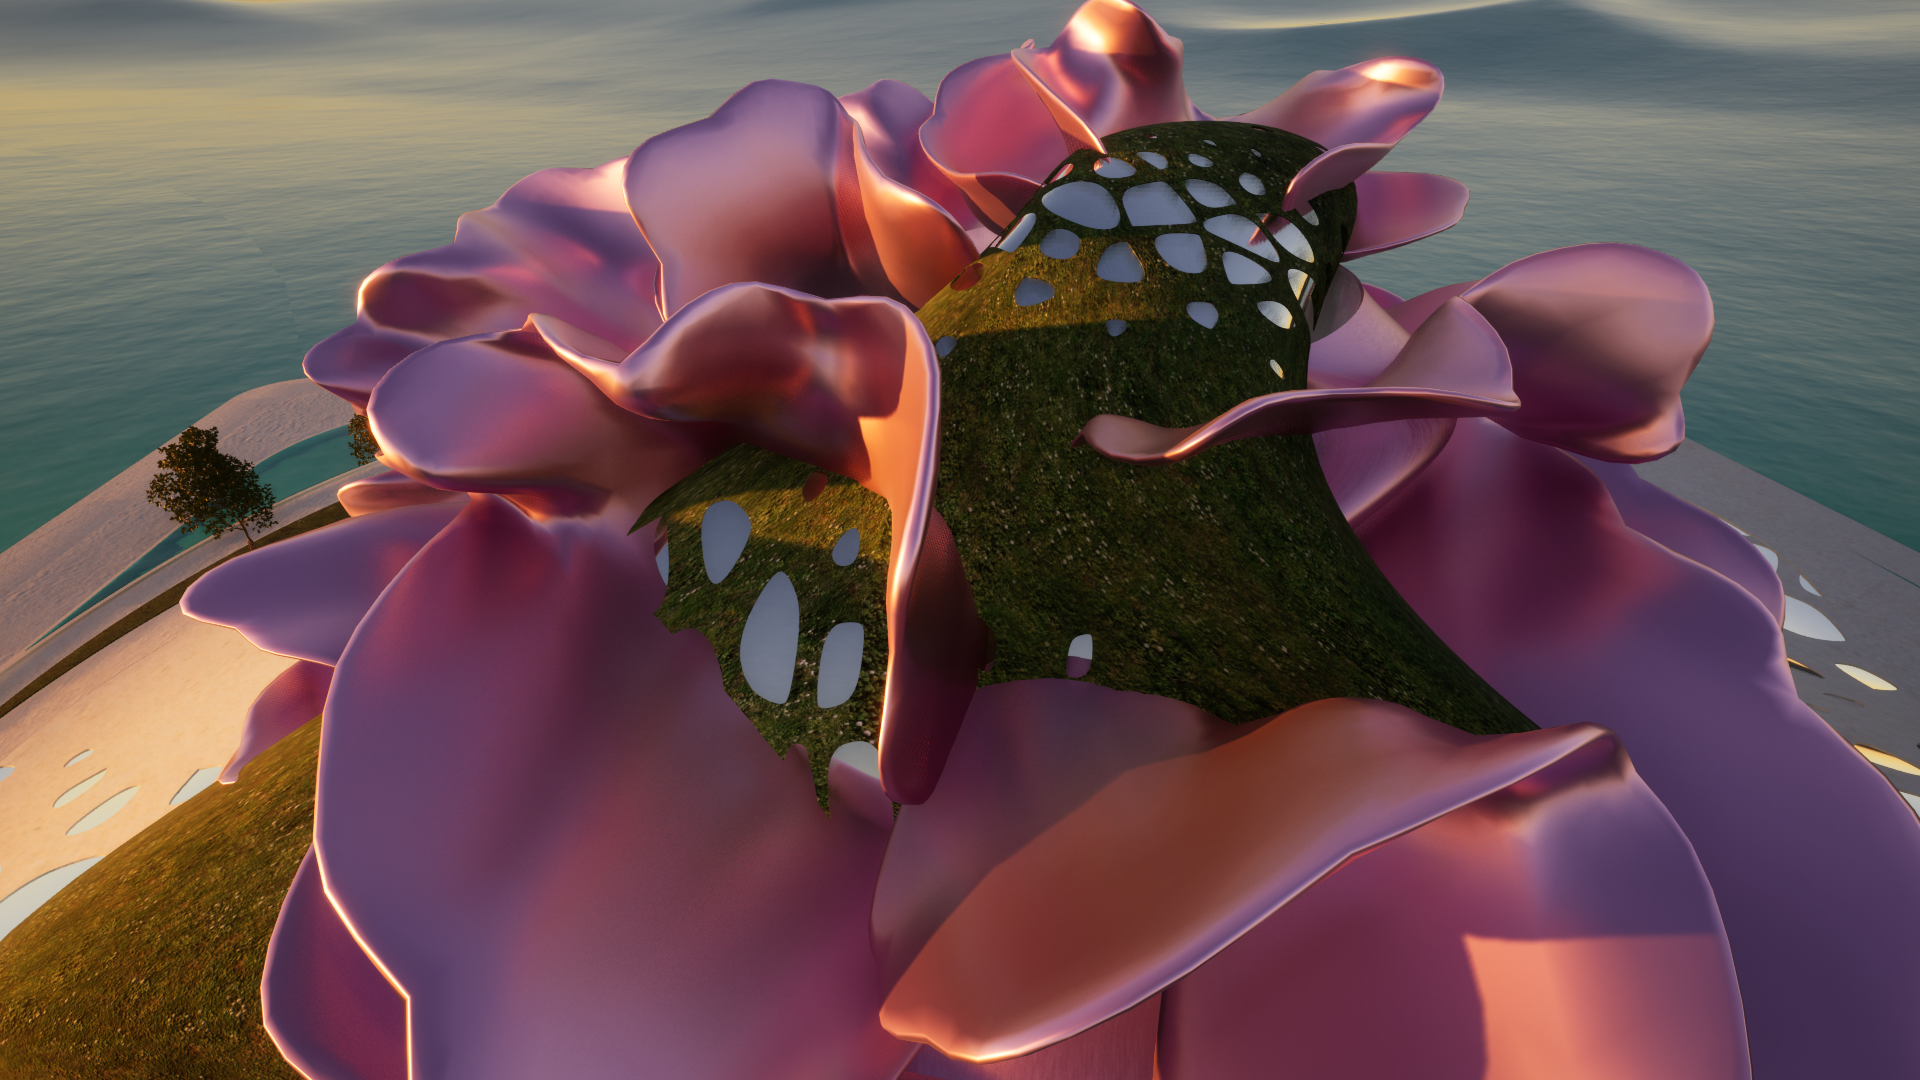 Debbie-Flevotomou-Architects-The-Great-Reef-2024-Kinetic-Architecture-Parametric-design-27.png